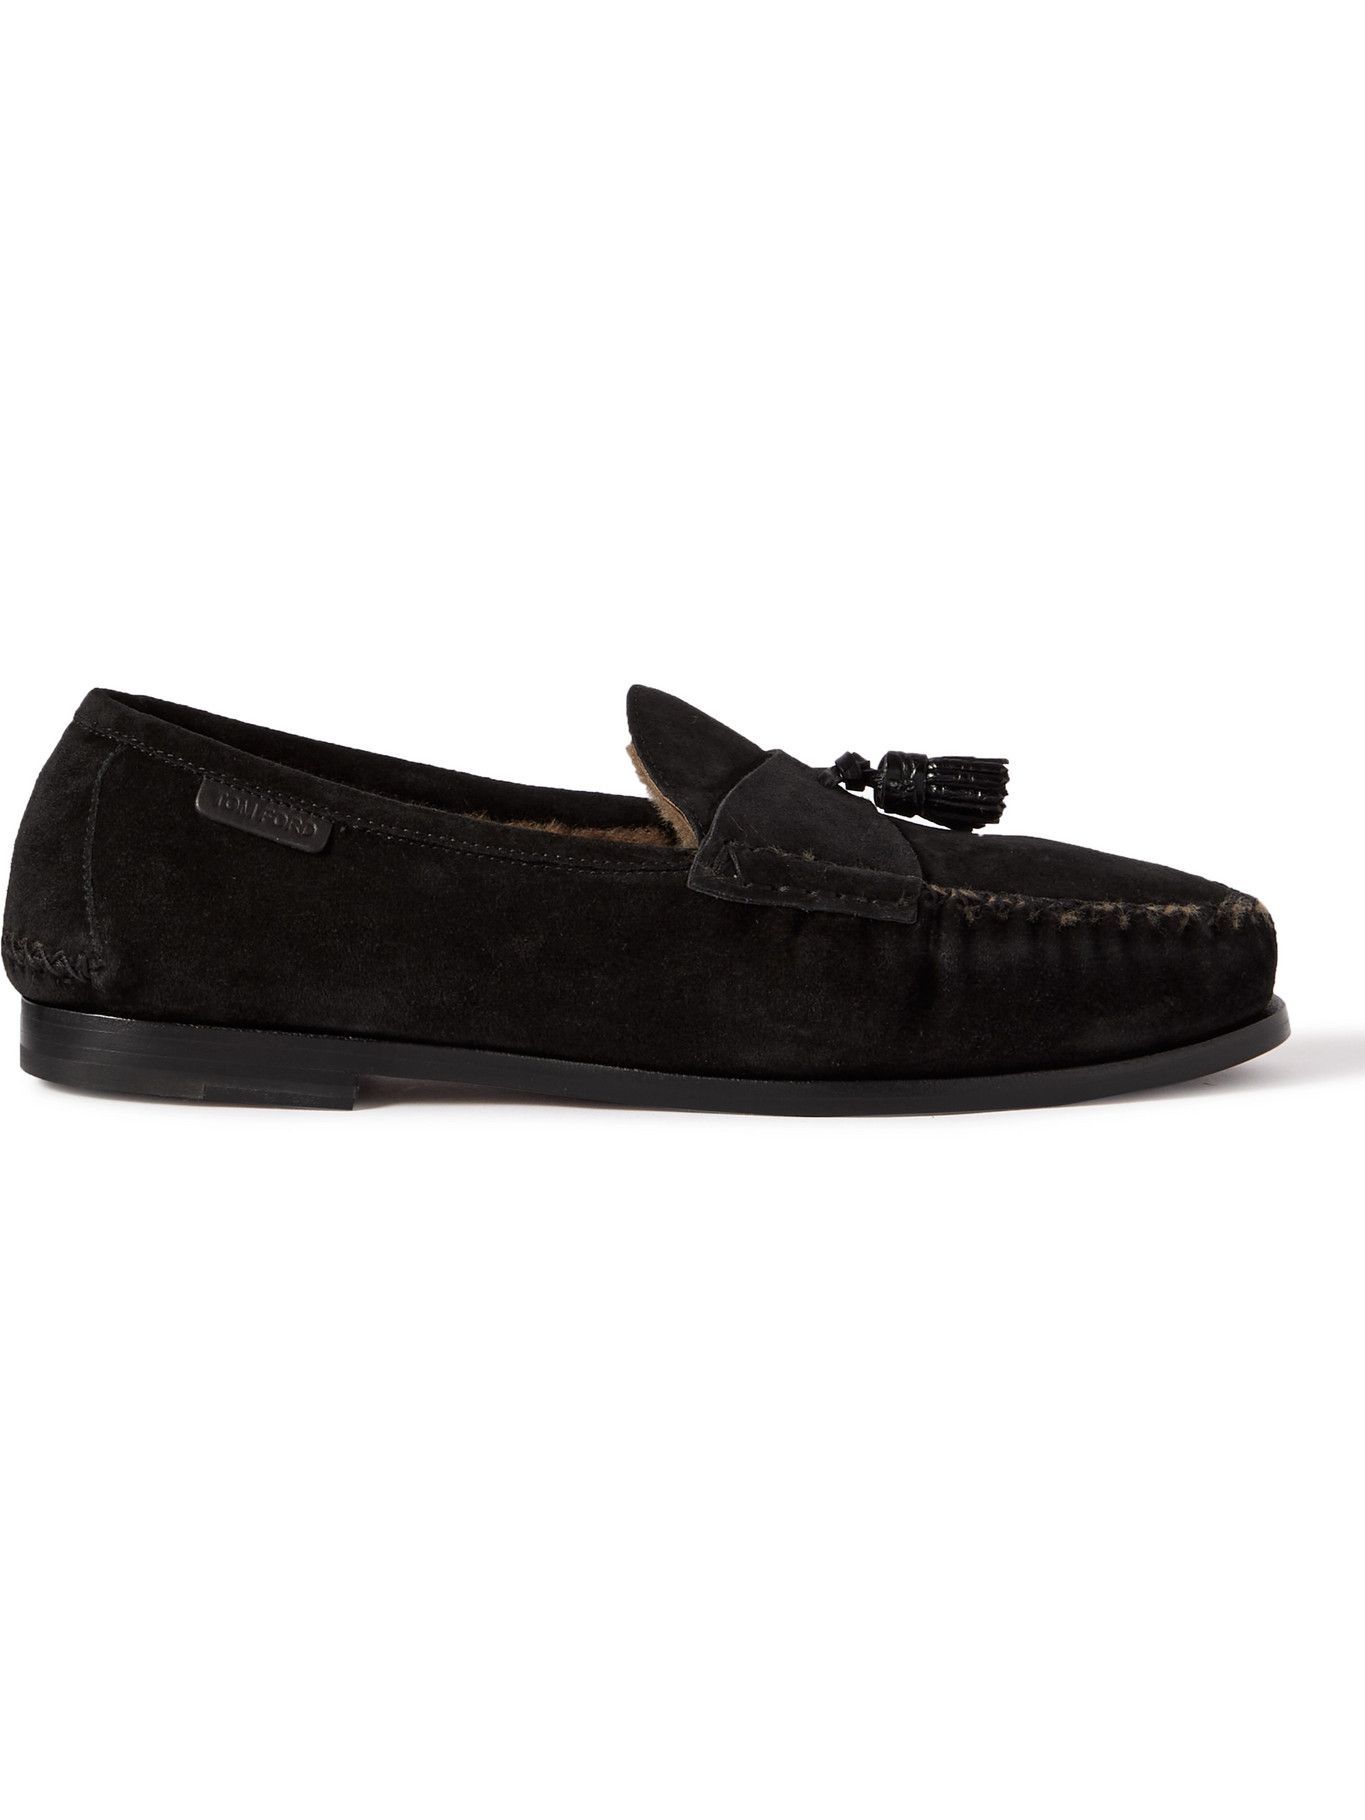 TOM FORD - Berwick Shearling-Lined Tasselled Suede Loafers - Black TOM FORD